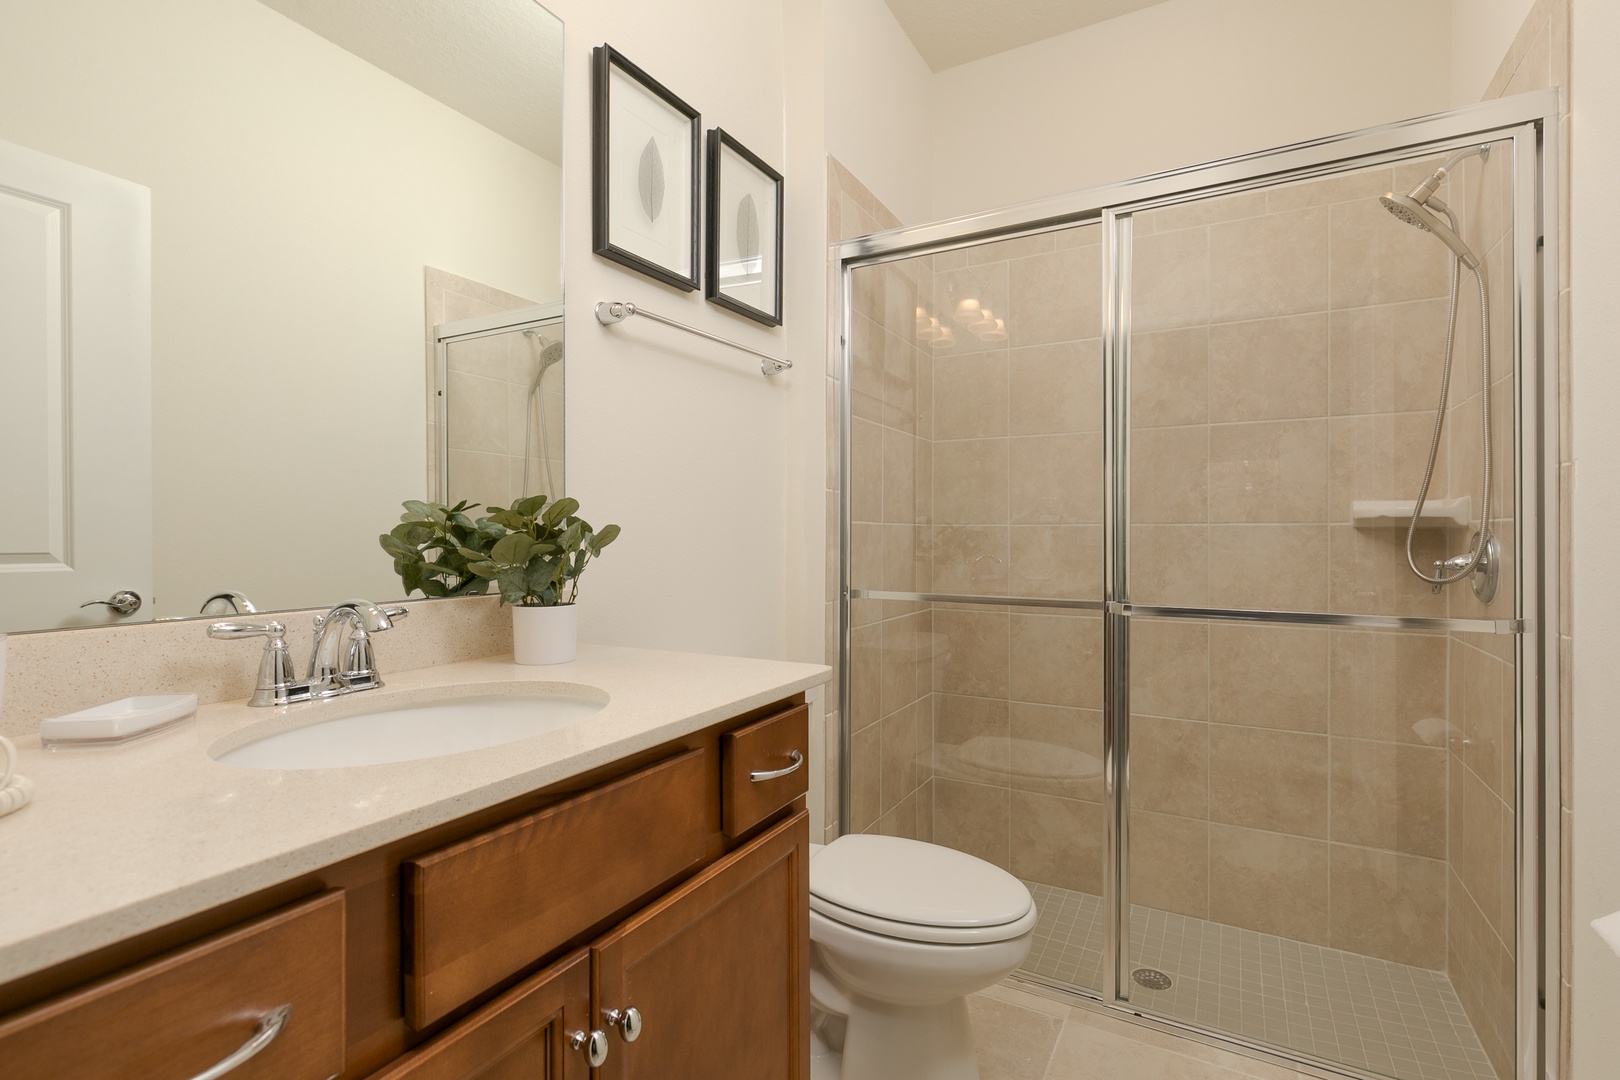 This full bathroom on the first floor includes a single vanity & glass shower